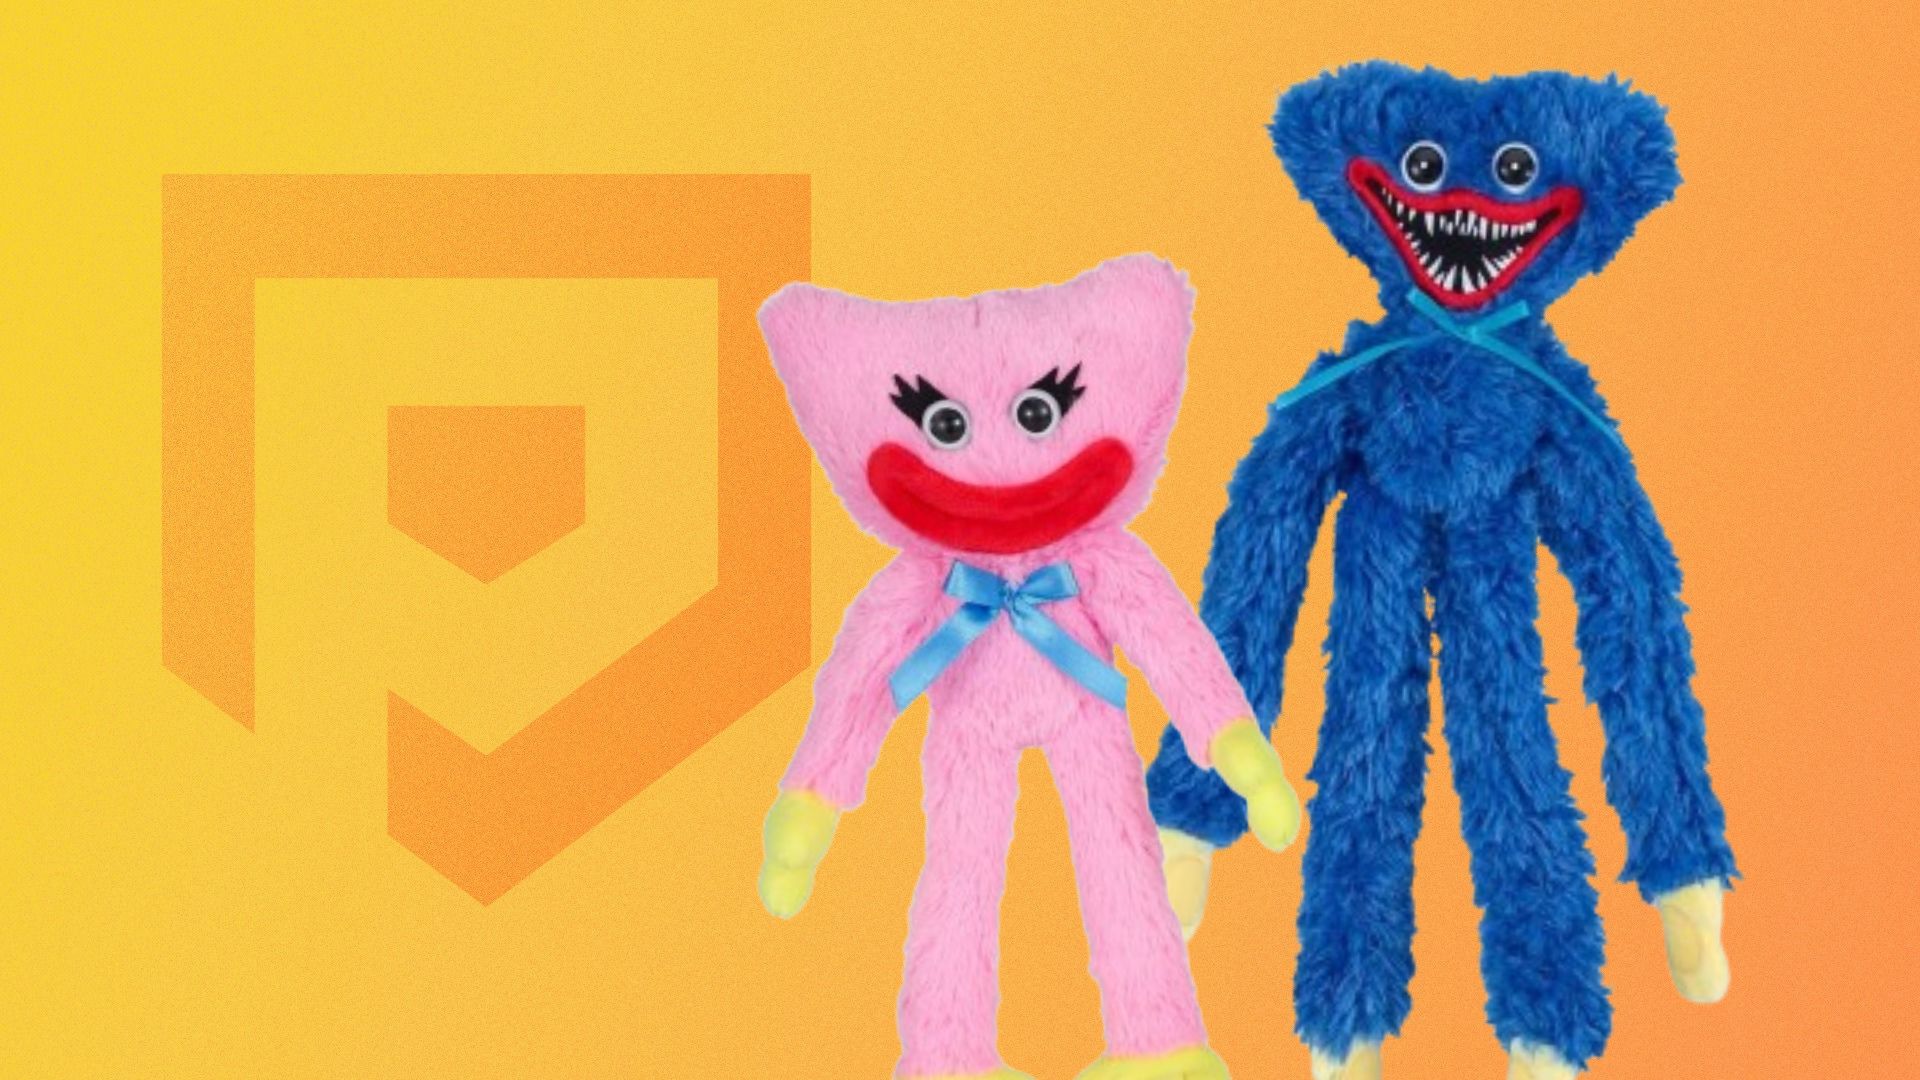 Our Official Poppy Playtime Plush Collection! 